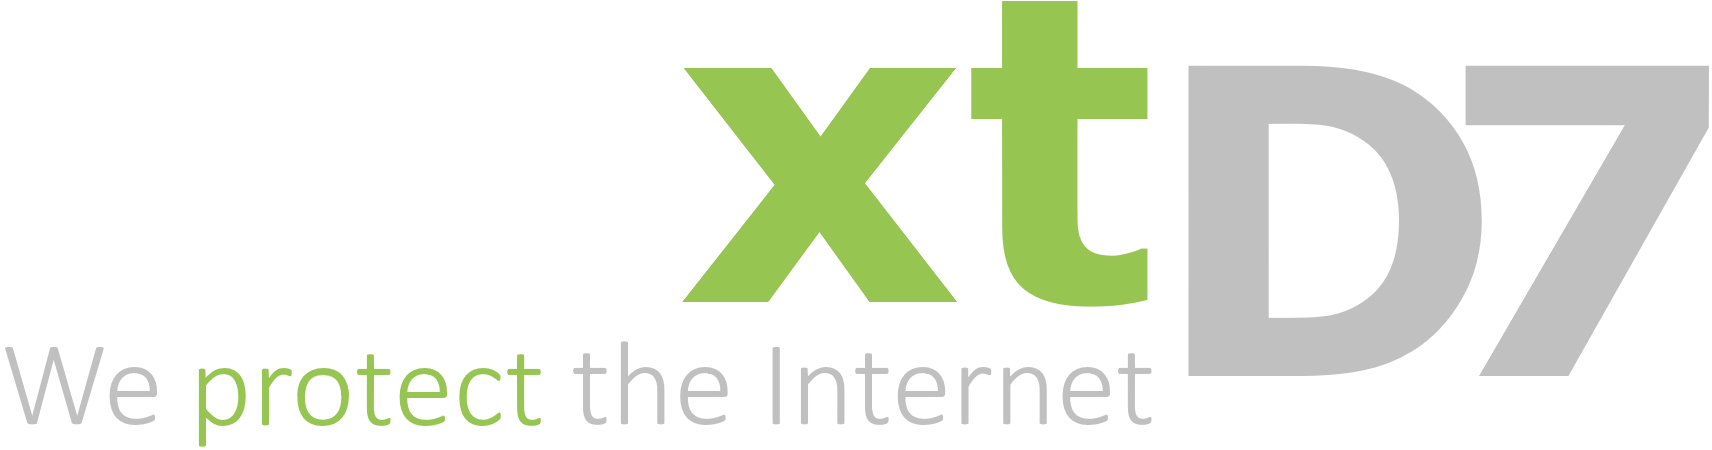 xtd7 - We protect the Internet